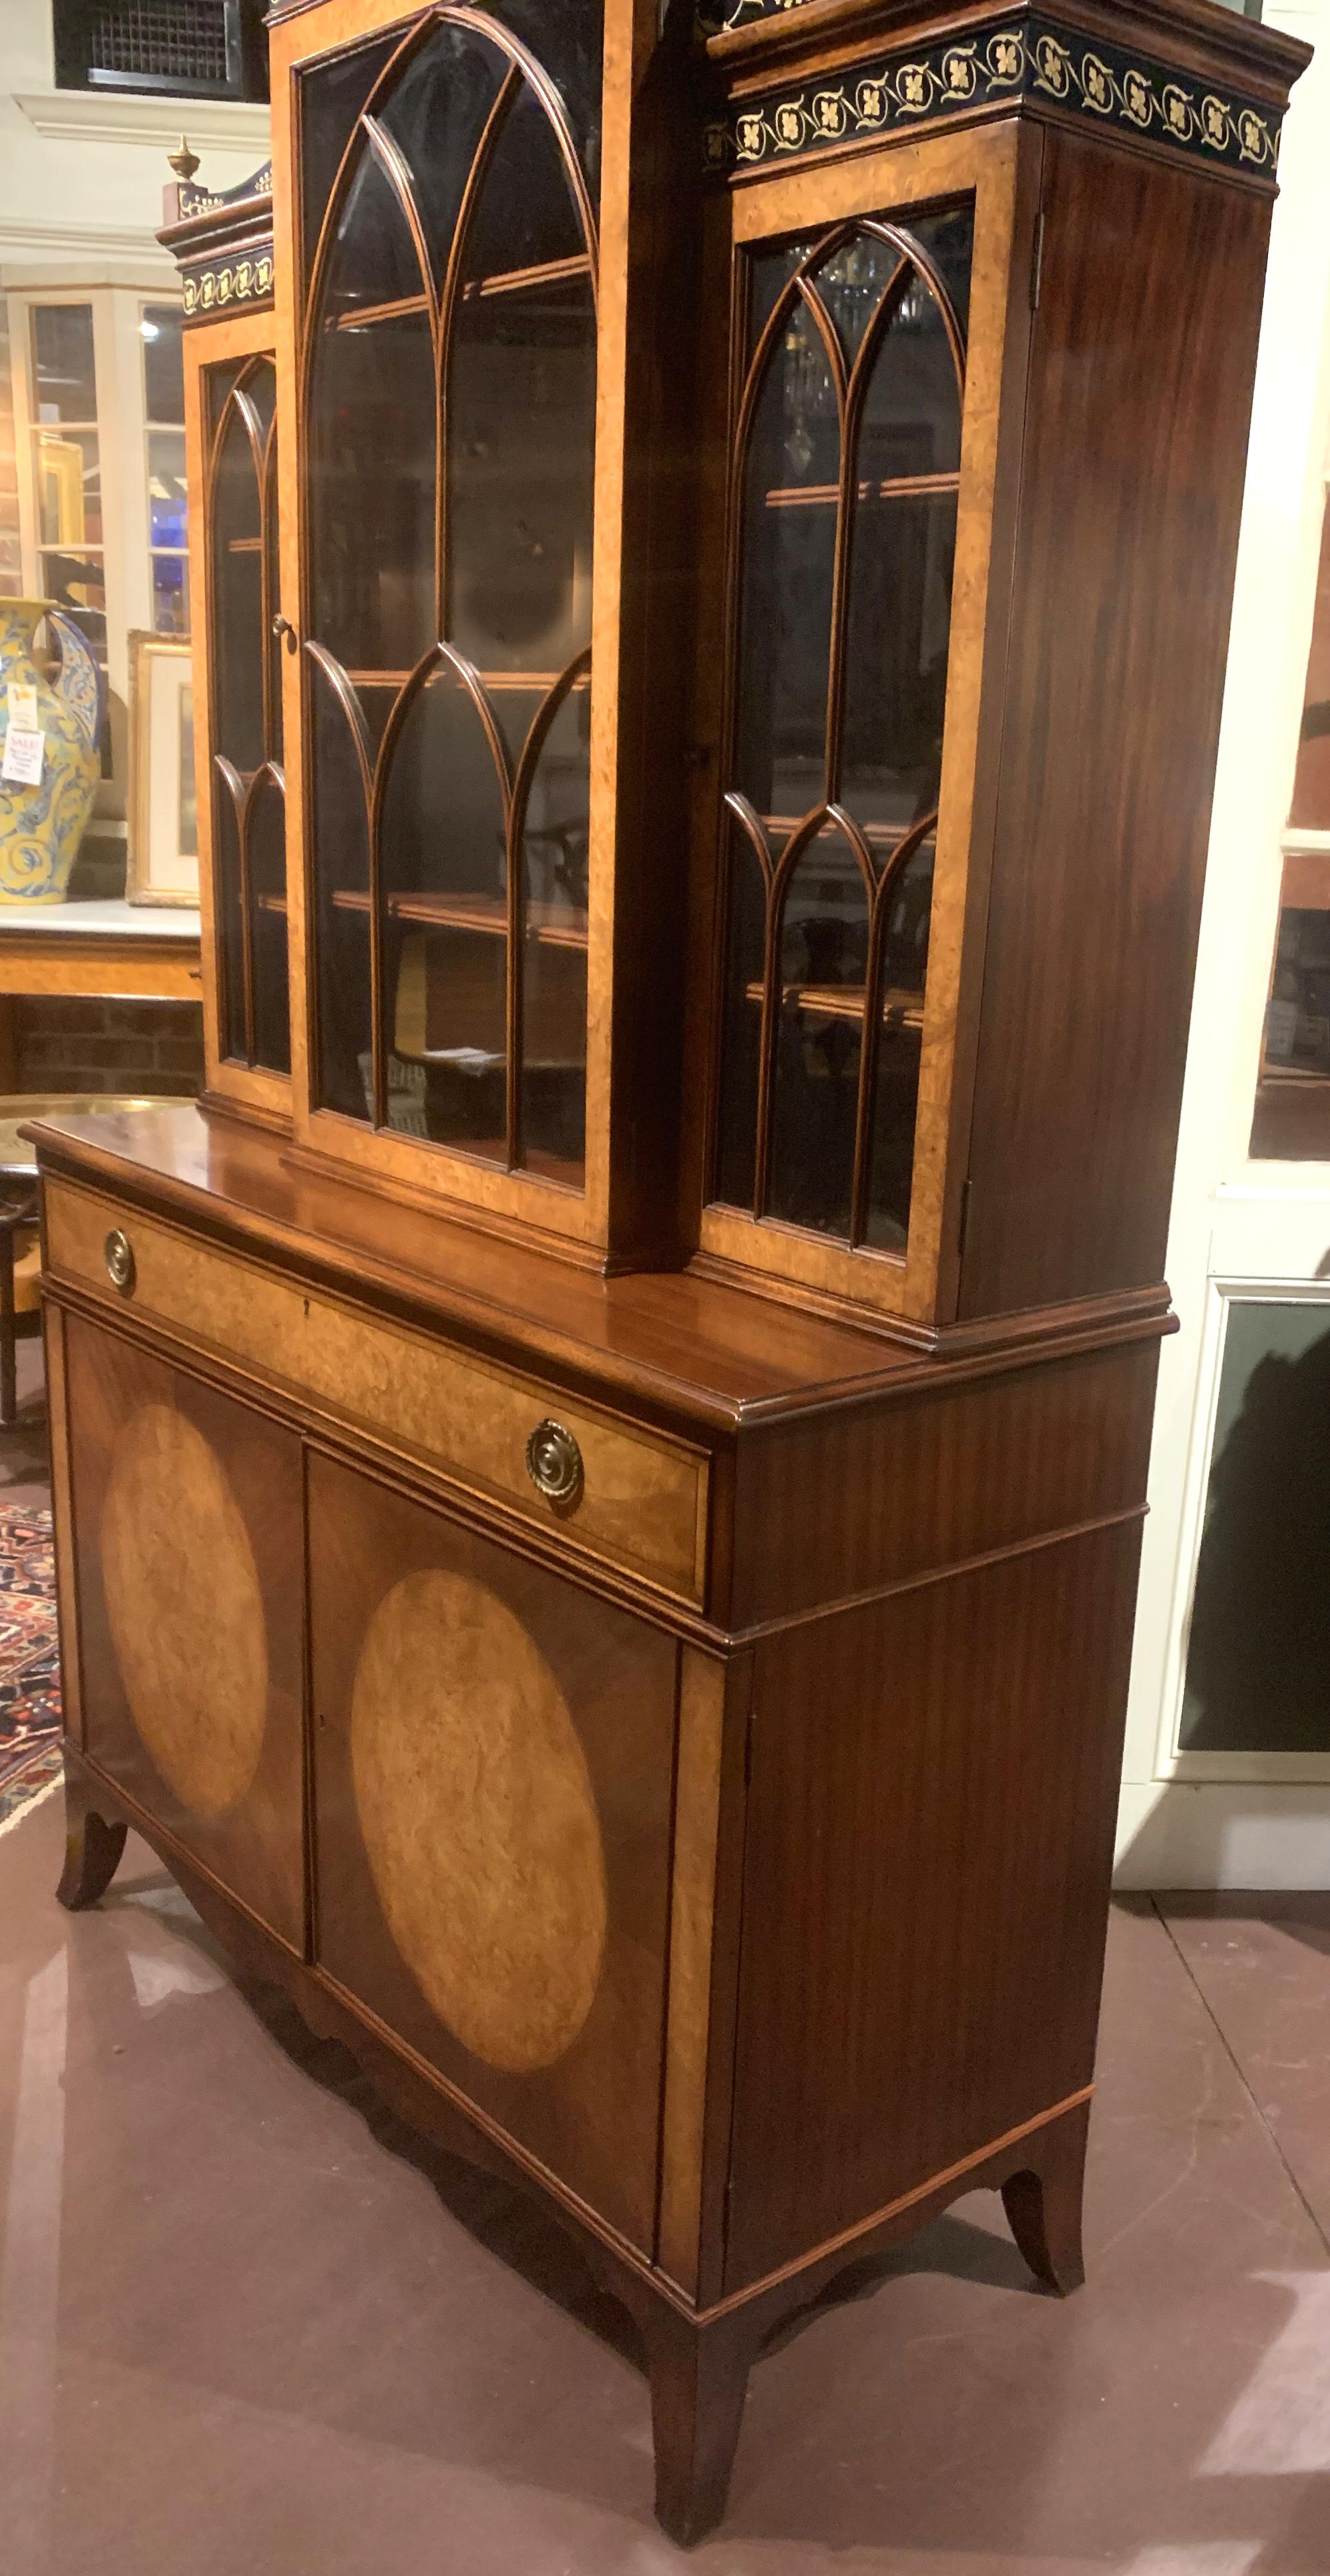 A fine diminutive two section Adam style bookcase or china cabinet, its upper section featuring a foliate carved gilt crest, four urn form finials, and hand painted Classical frieze surmounting three satinwood or light burled wood banded glazed